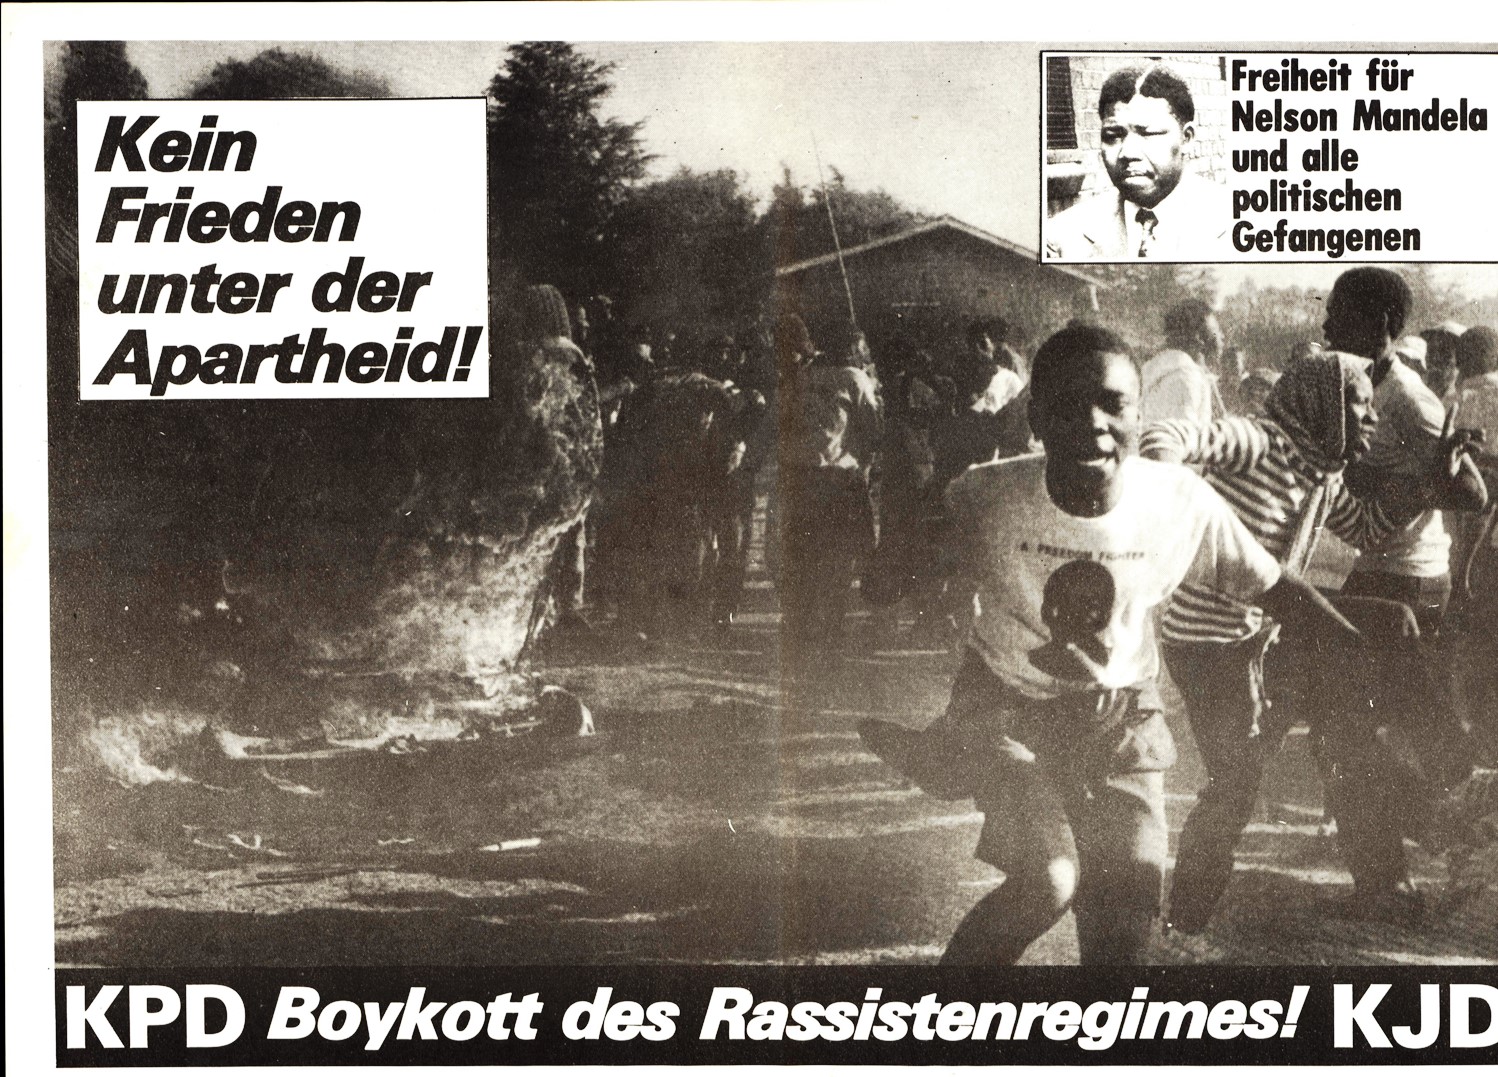 Roter Morgen, 19. Jg., 23. August 1985, Nr. 33/34, Seite 13